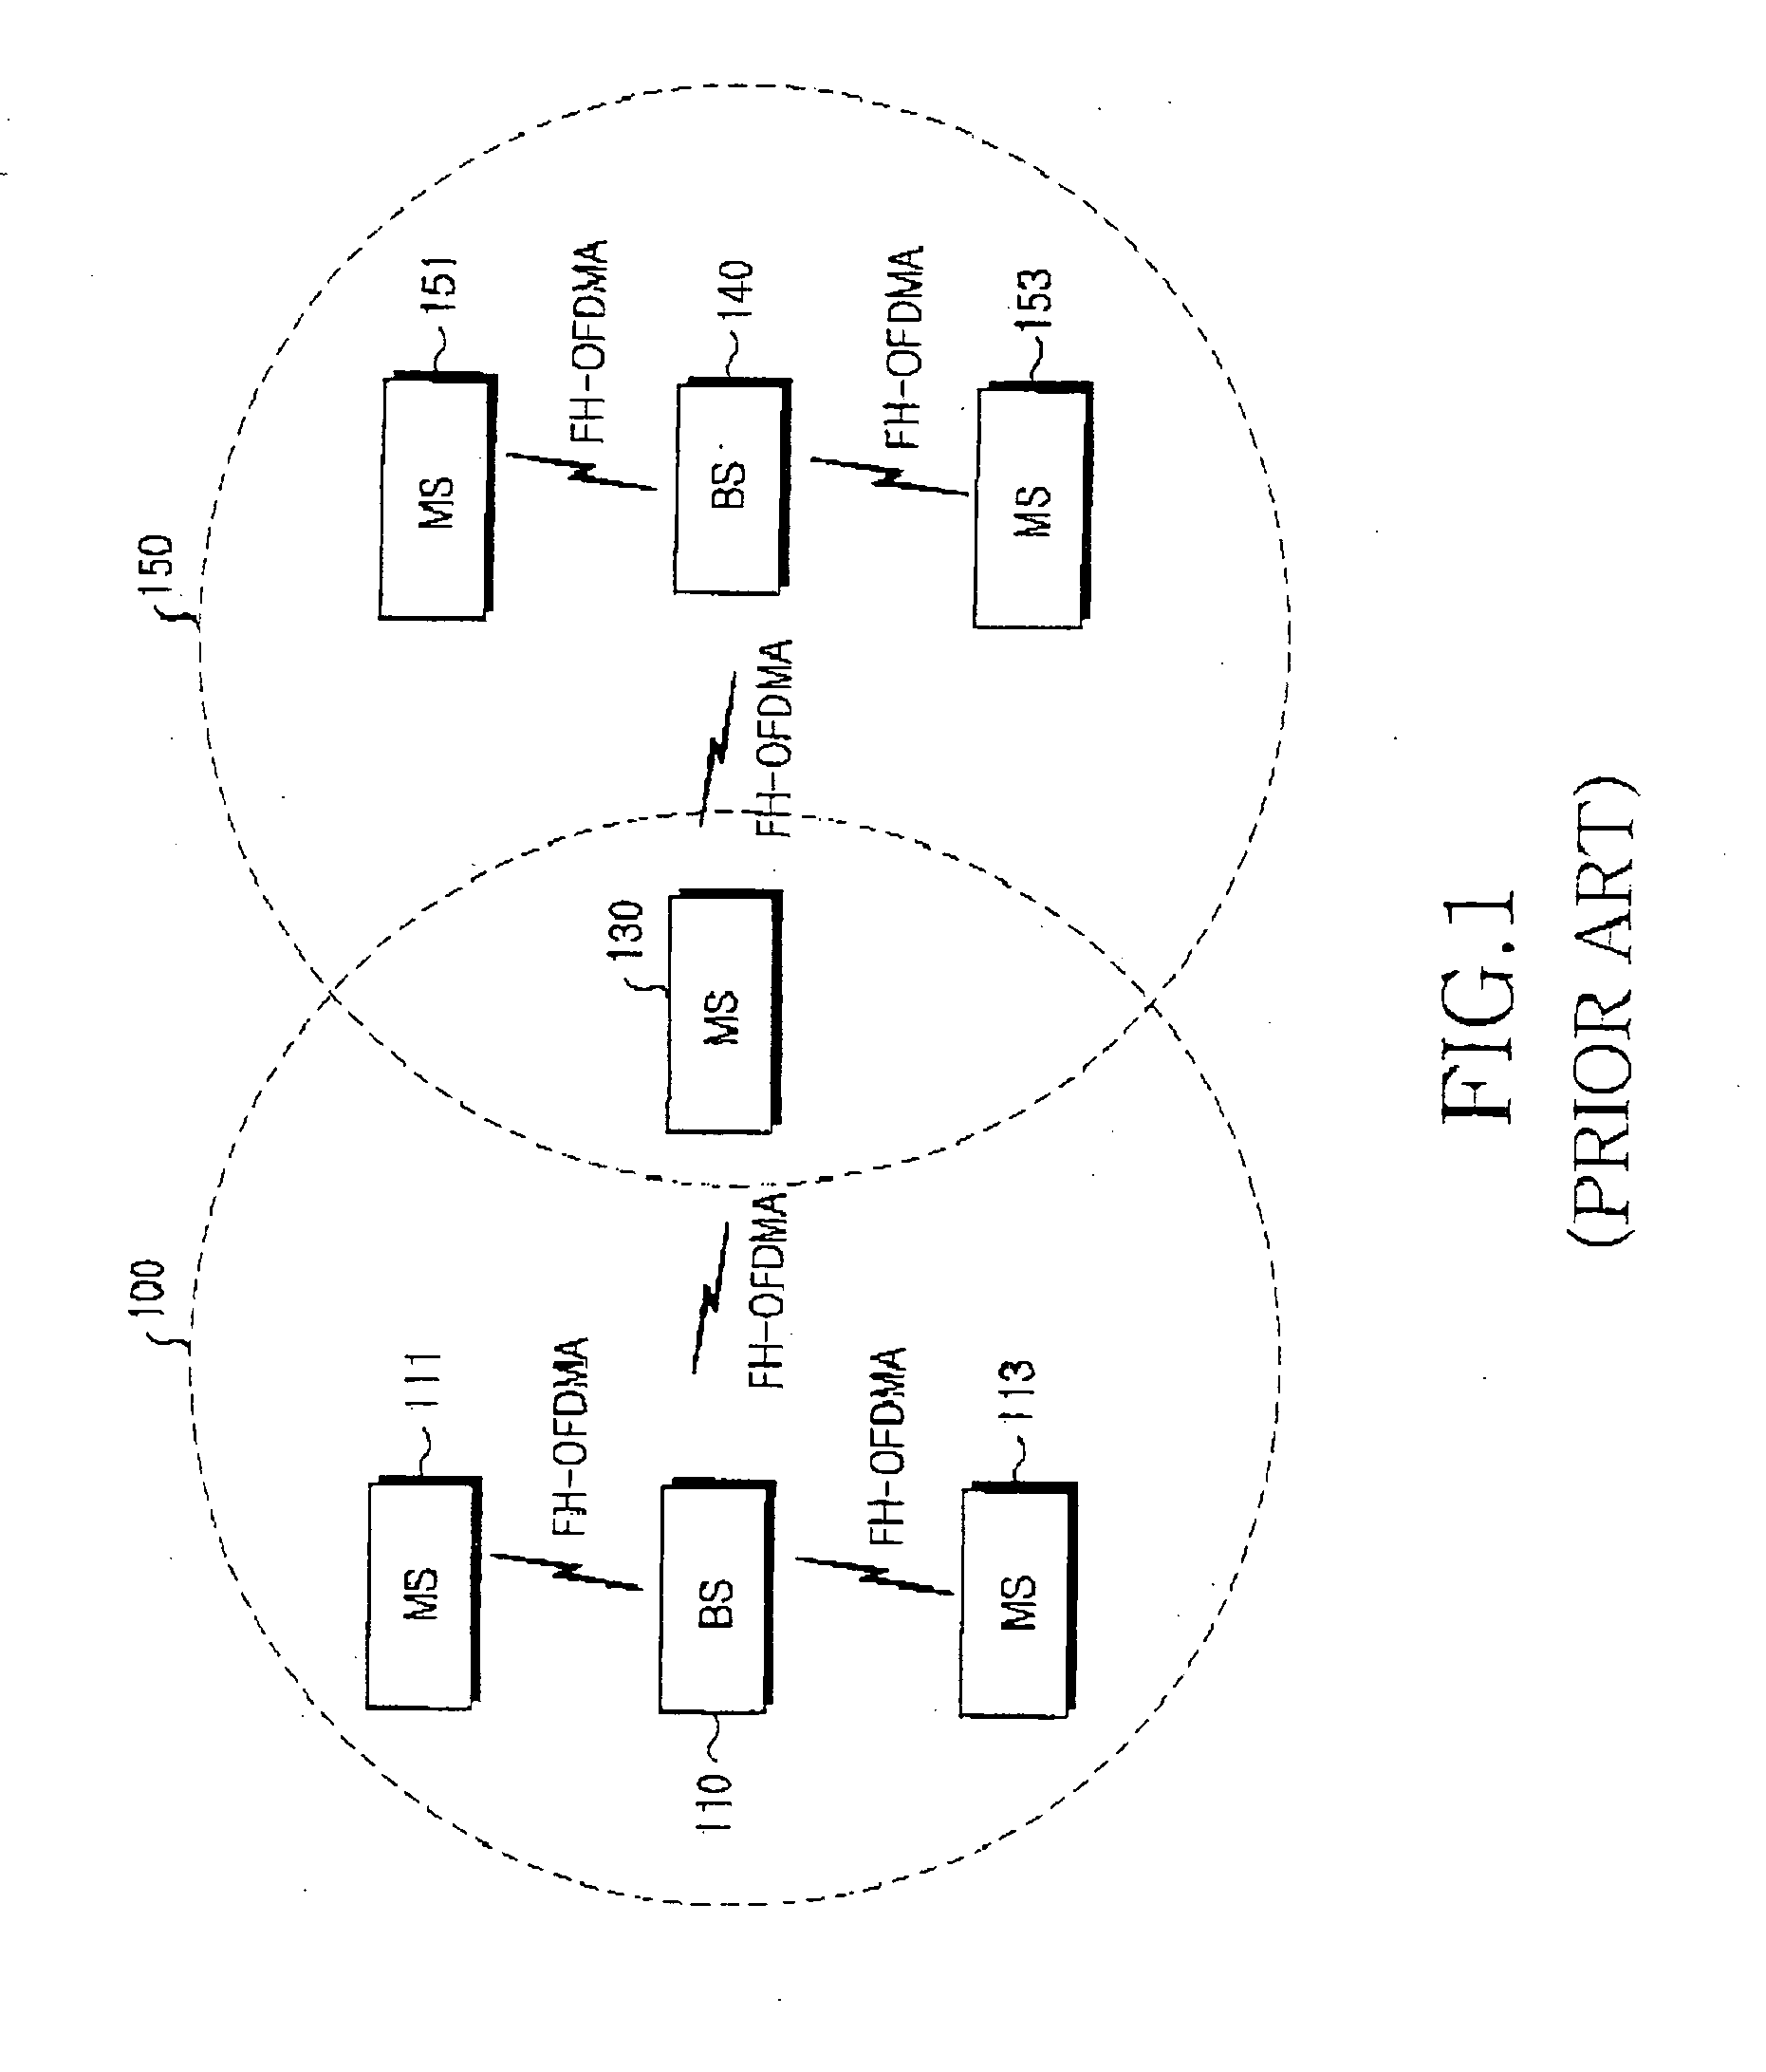 Method for transmitting a signal using a precise adaptive modulation and coding scheme in a frequency hopping-orthogonal frequency division multiple access communication system